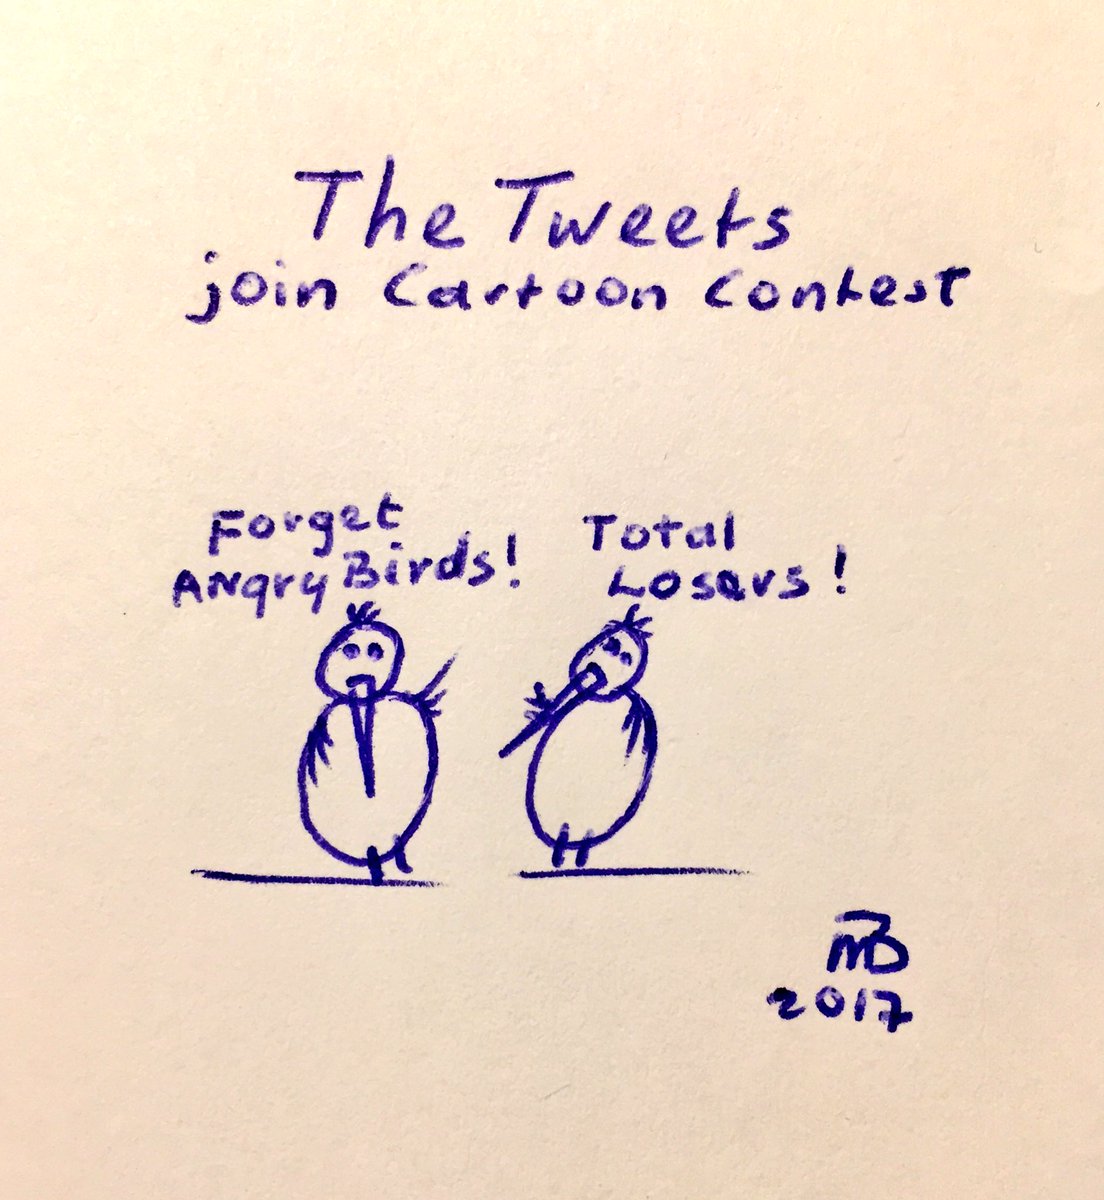 The Tweets join cartoon contest.